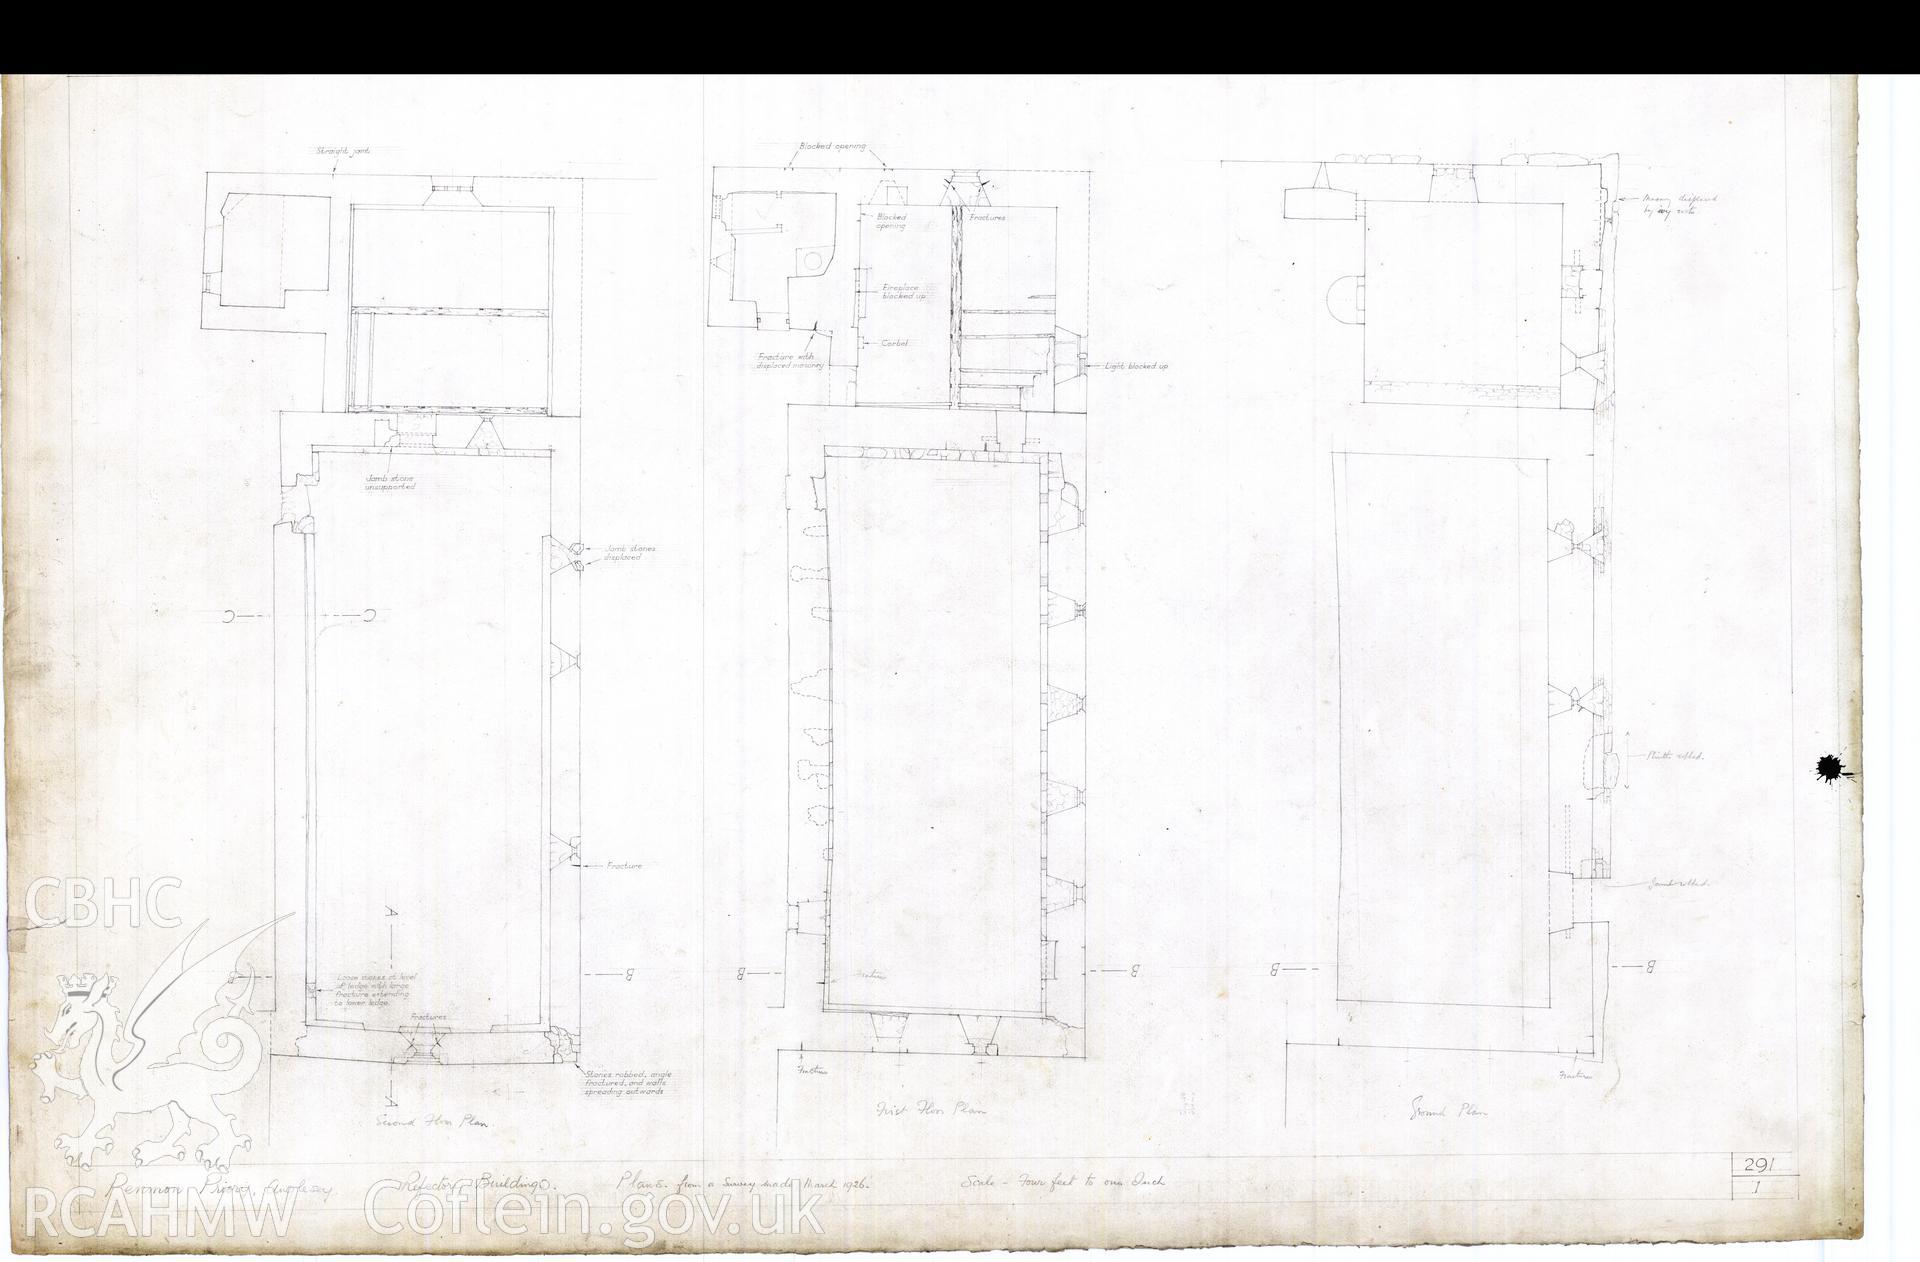 Cadw guardianship monument drawing of Penmon Priory. Refectory, draft plans. Cadw Ref. No:291/1. Scale 1:48.